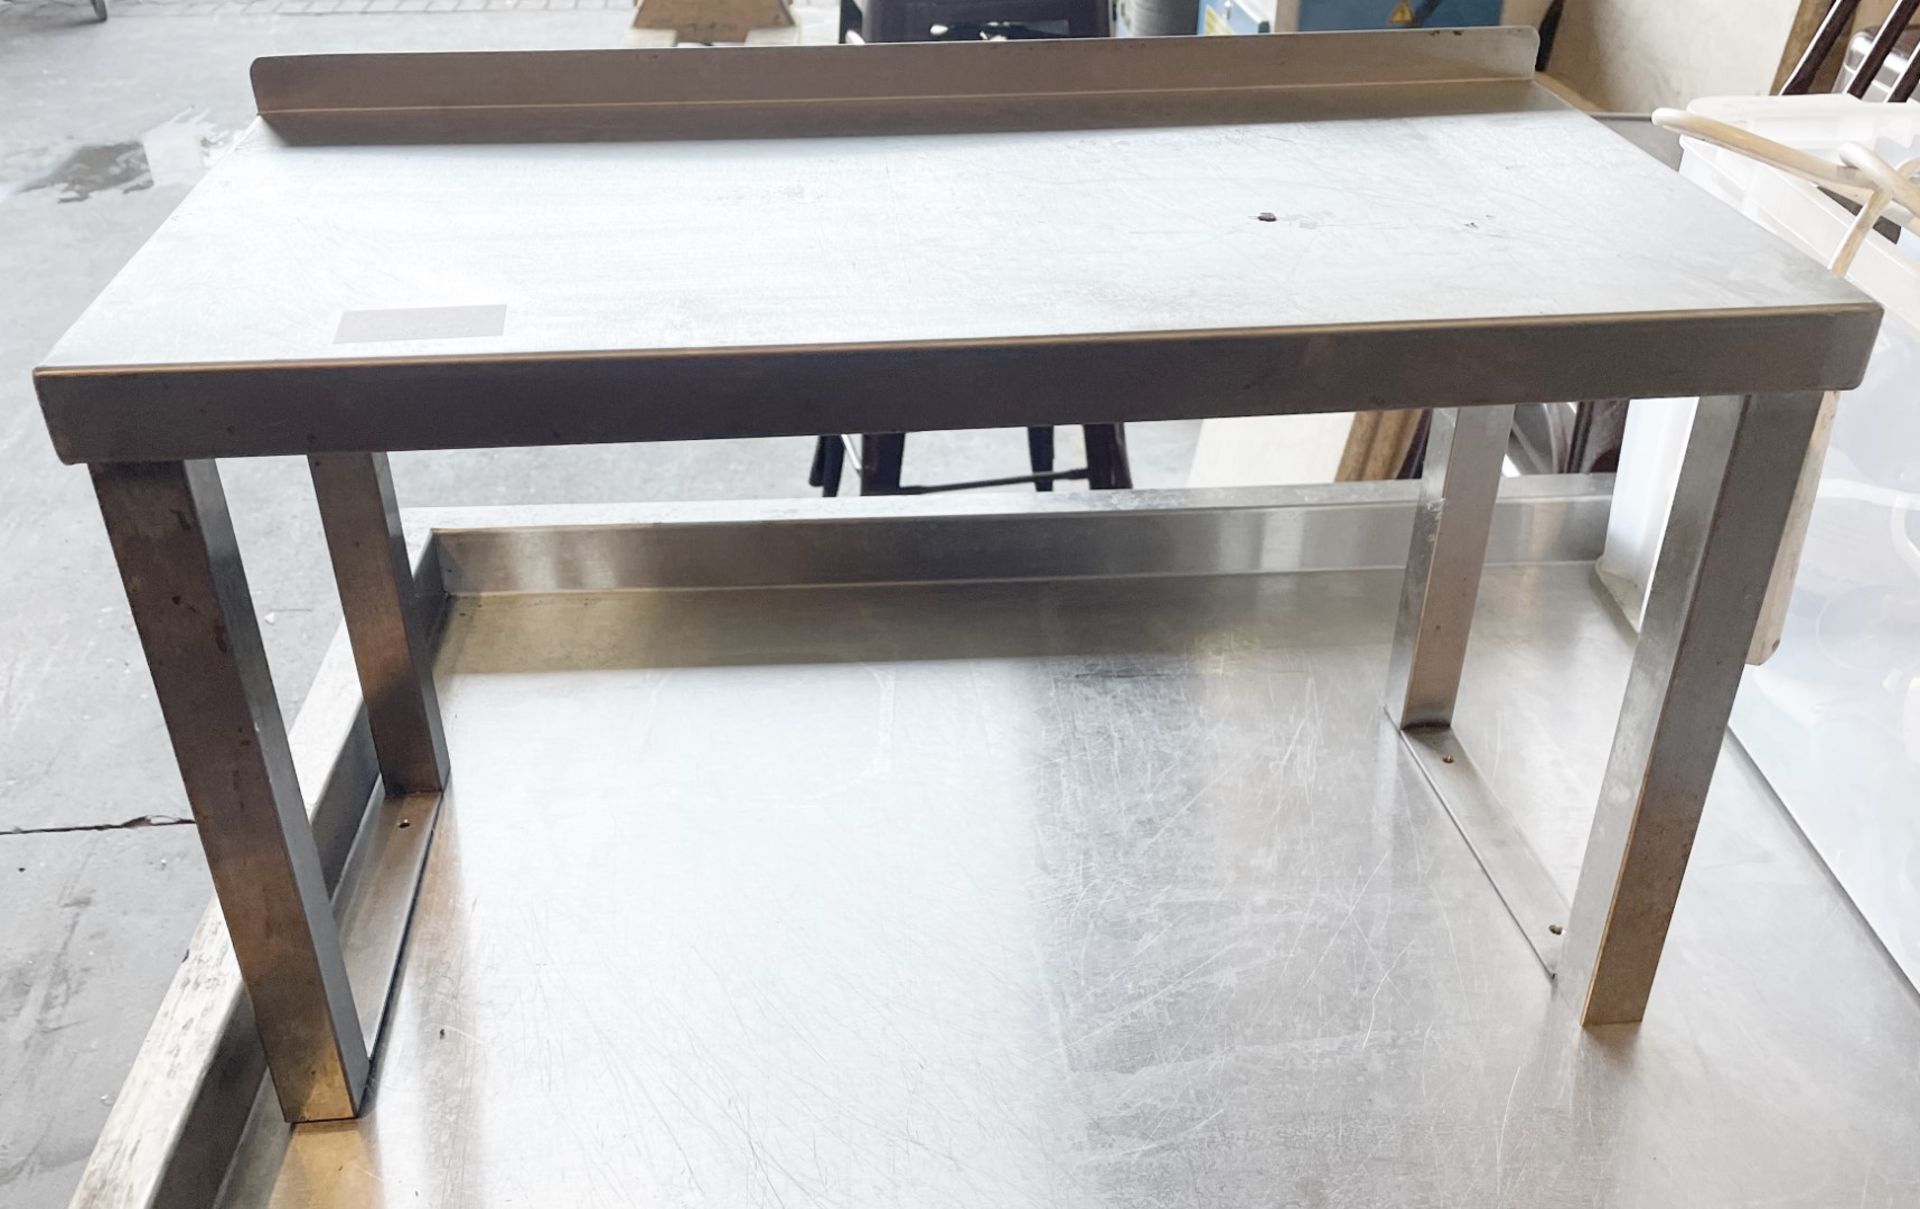 1 x Counter Top Stainless Steel Prep Table With  - Ref: BGC043 - CL807 - Location: Essex, RM19This